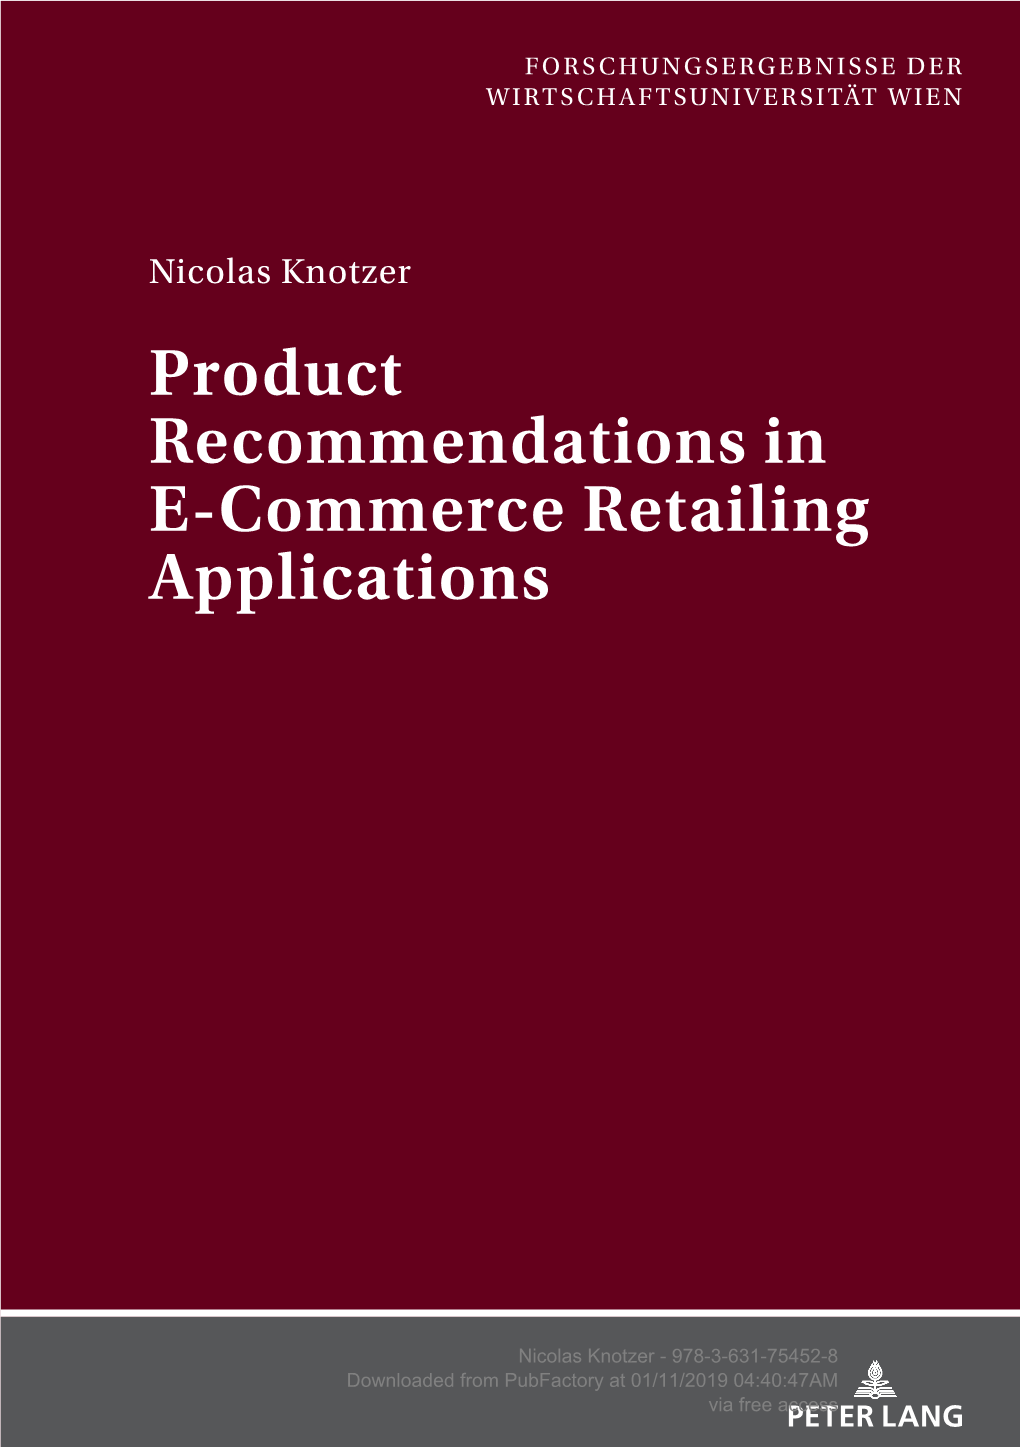 Product Recommendations in E-Commerce Retailing Applications